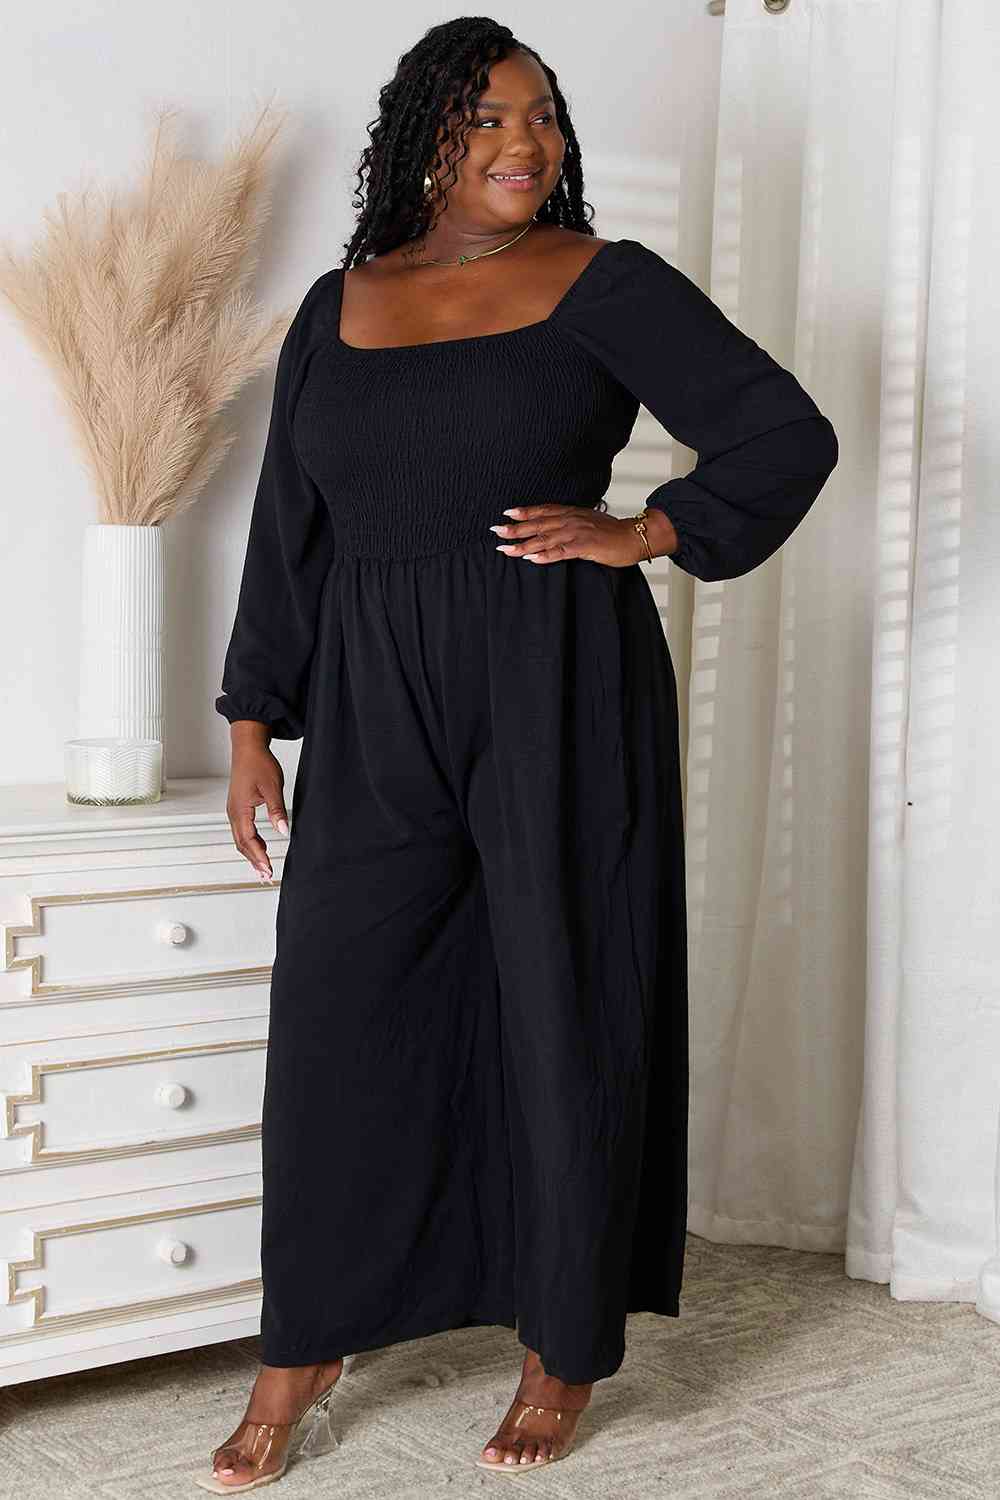 Double Take Square Neck Jumpsuit with Pockets king-general-store-5710.myshopify.com